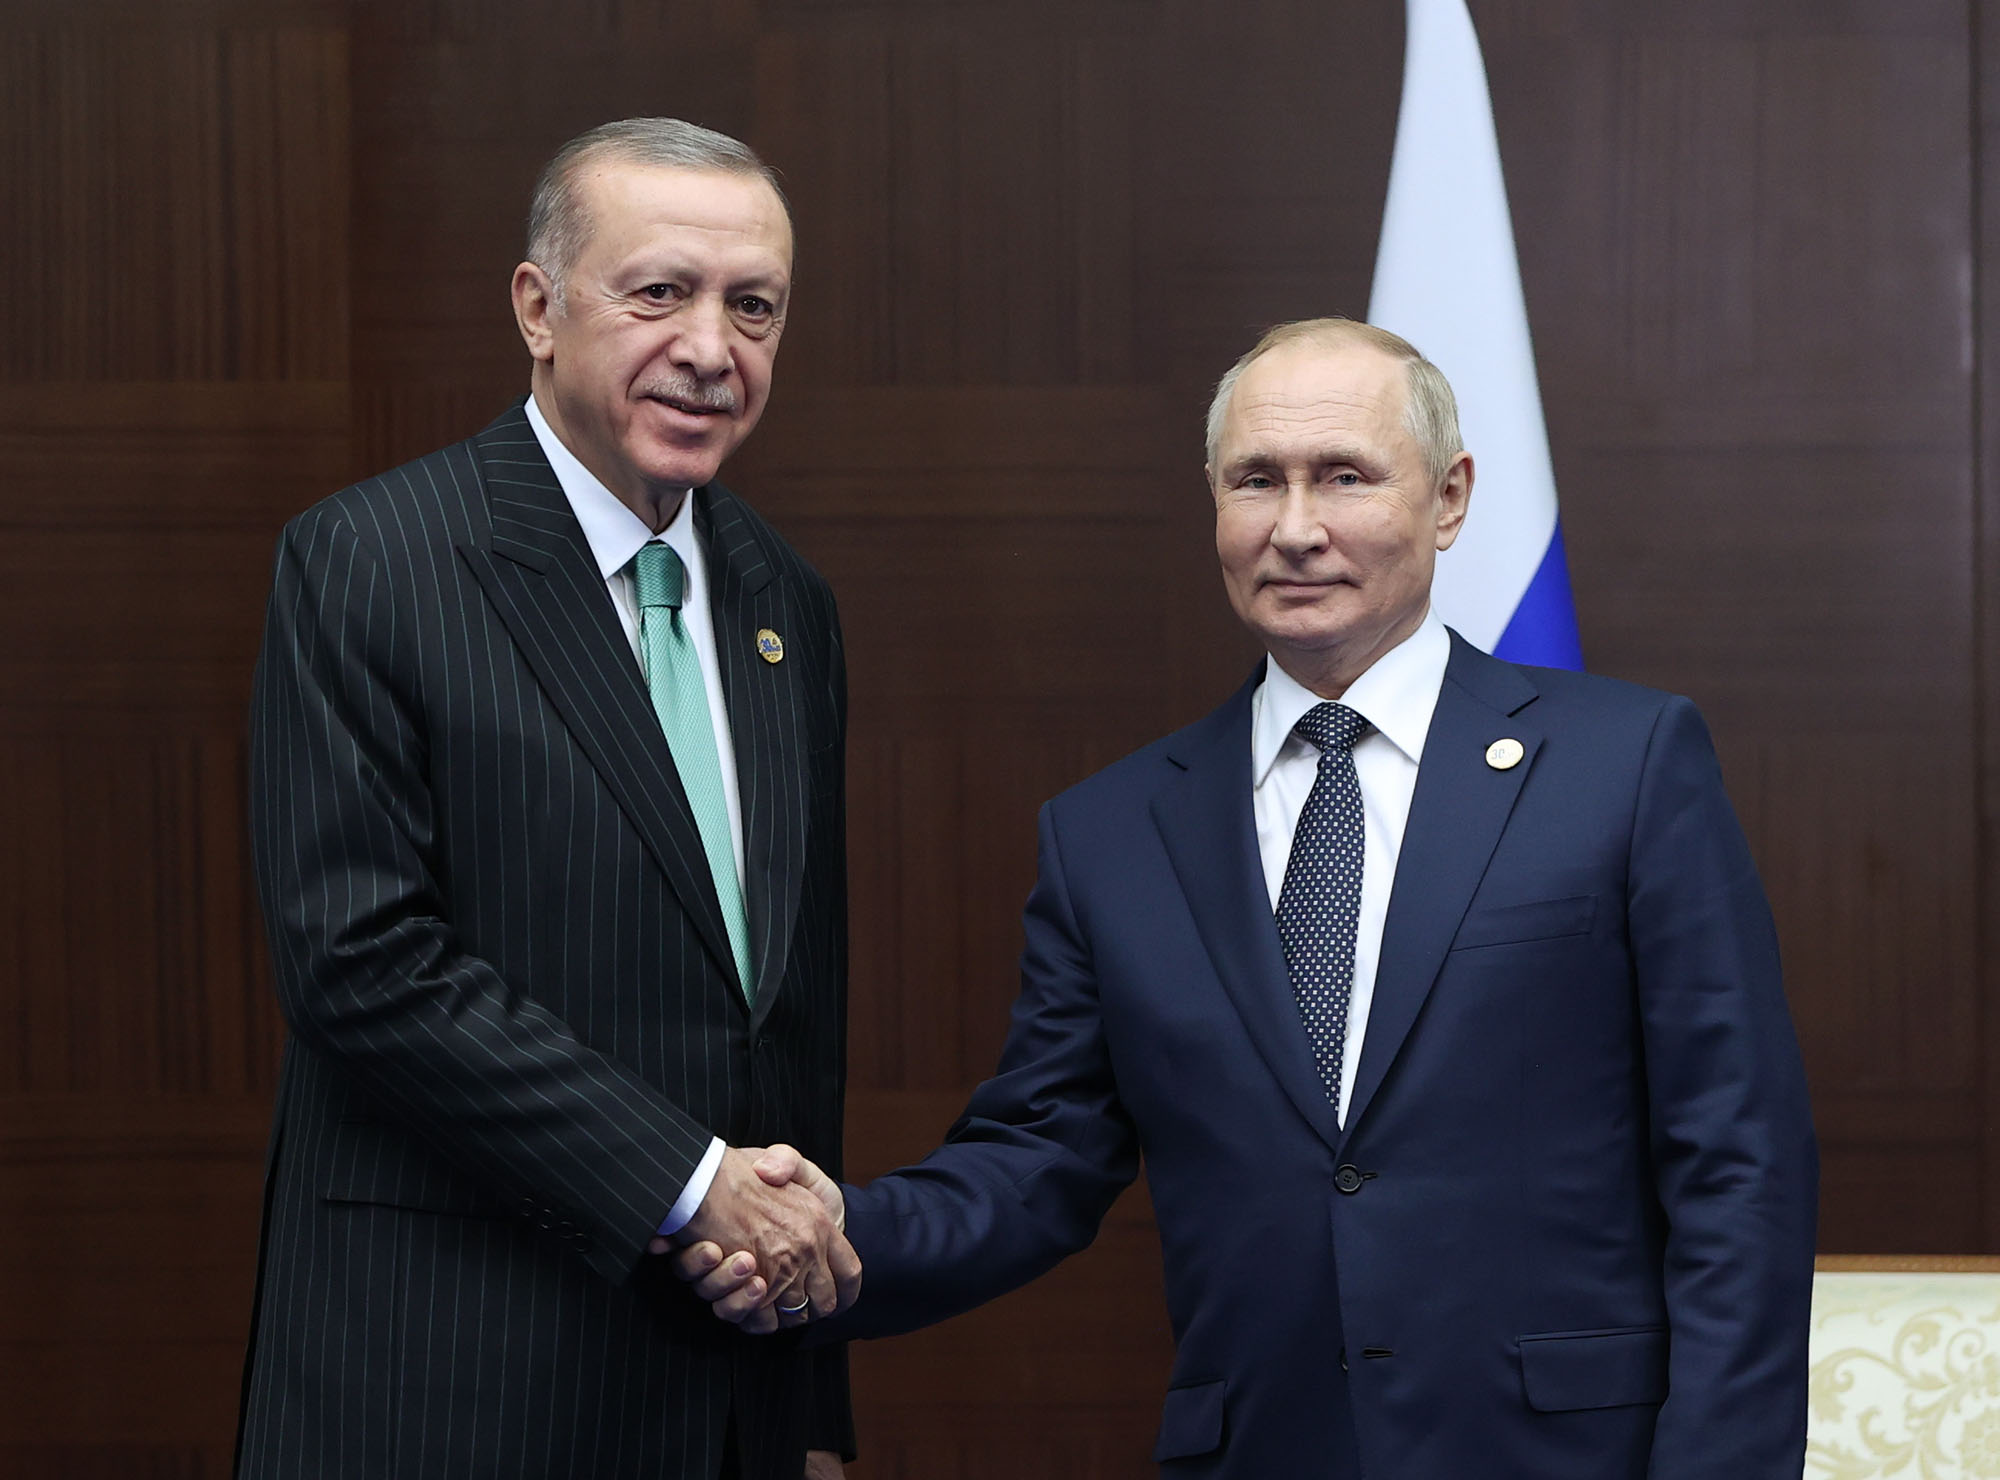 Turkish President, Recep Tayyip Erdogan, left, meets Russian President Vladimir Putin on the sidelines of the Conference on Interaction and Confidence Building Measures in Asia (CICA) in Astana, Kazakhstan, on October 13.